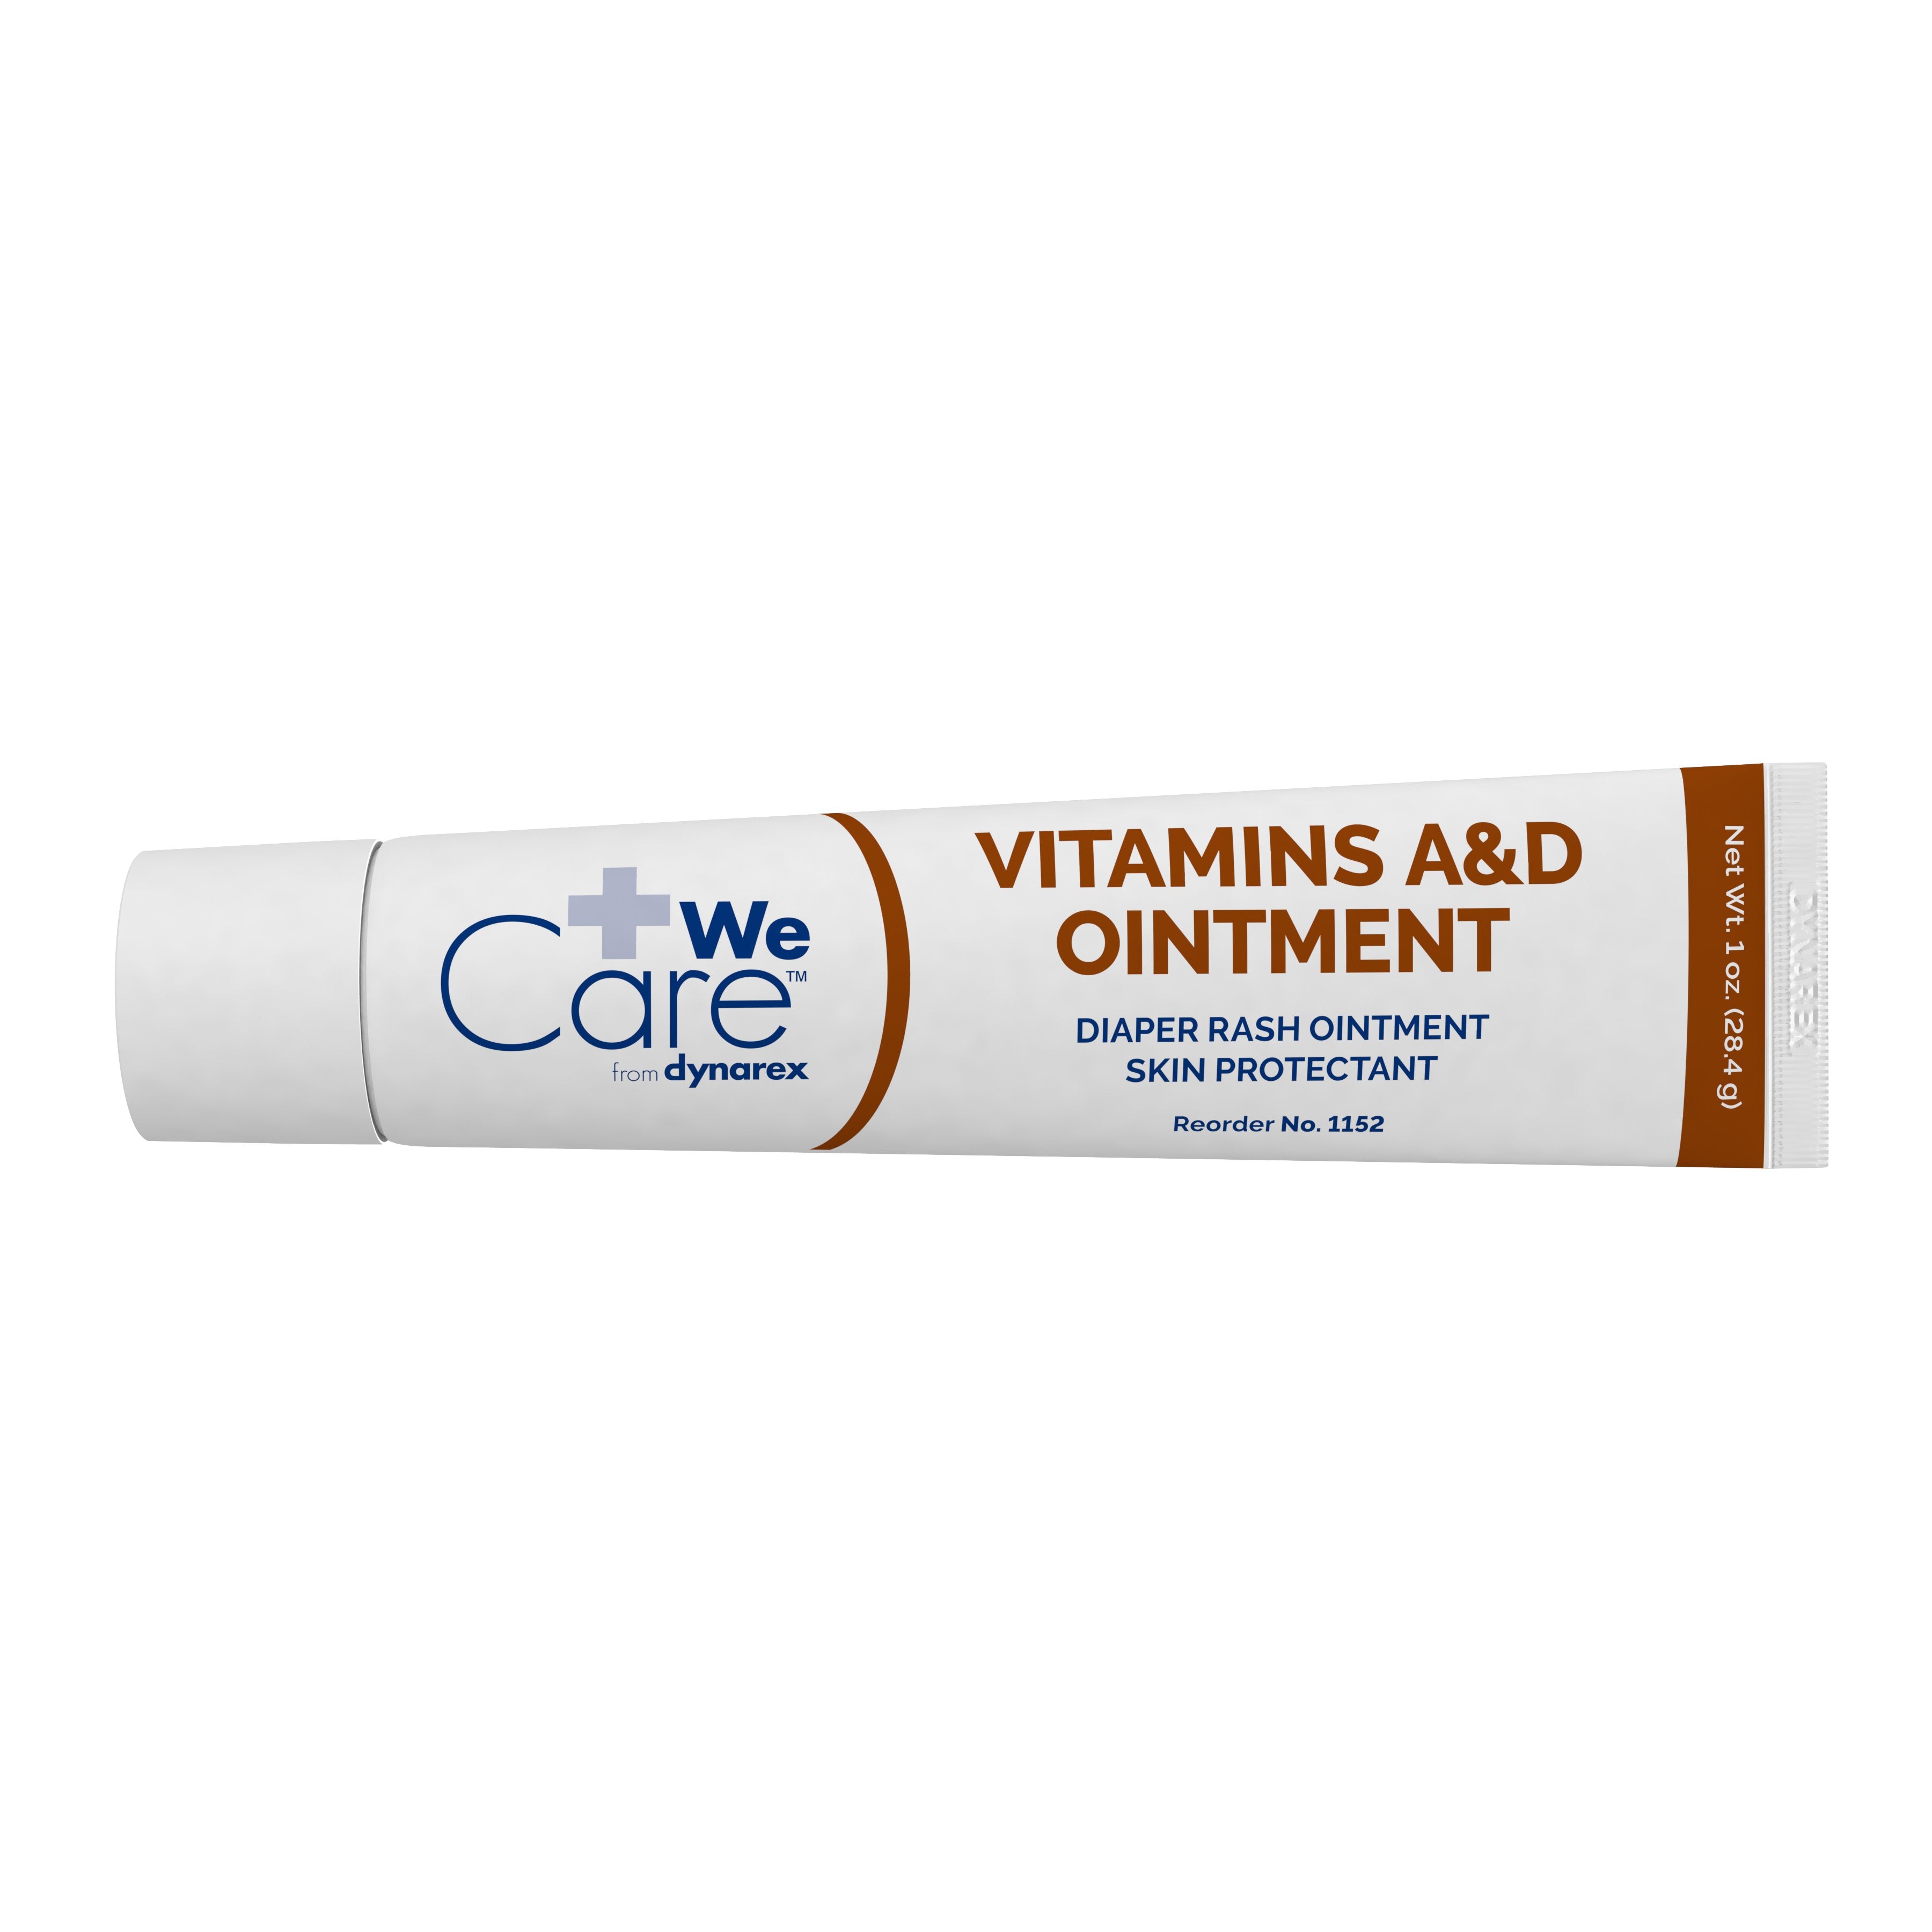 A & D Ointment We Care from Dynarex 1 oz. Tube Scented Ointment